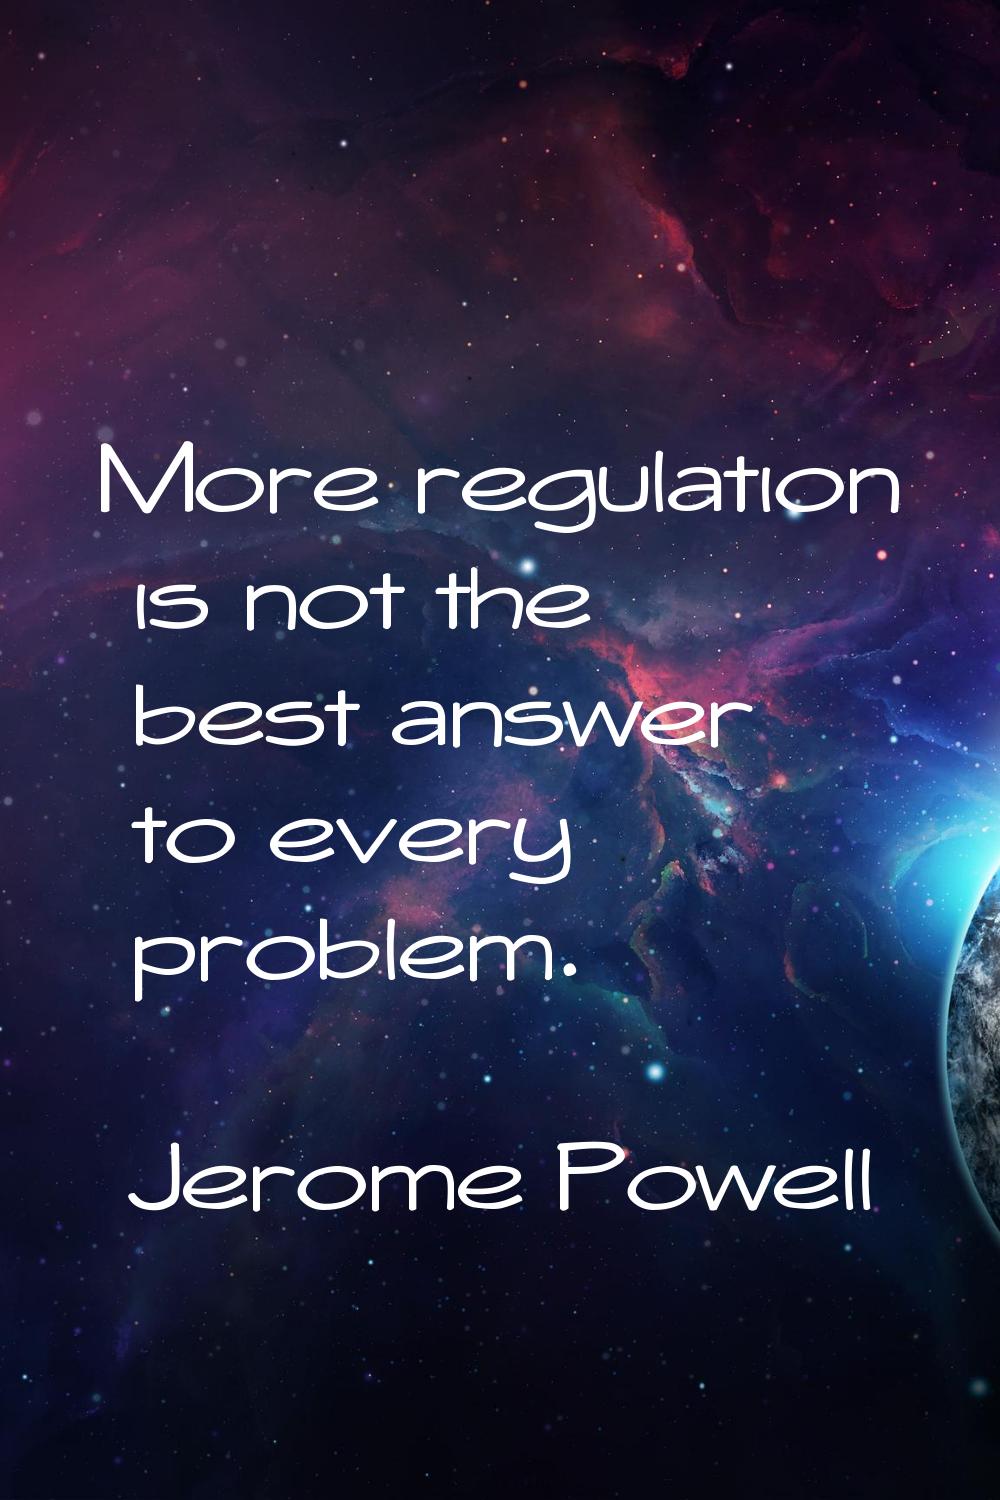 More regulation is not the best answer to every problem.